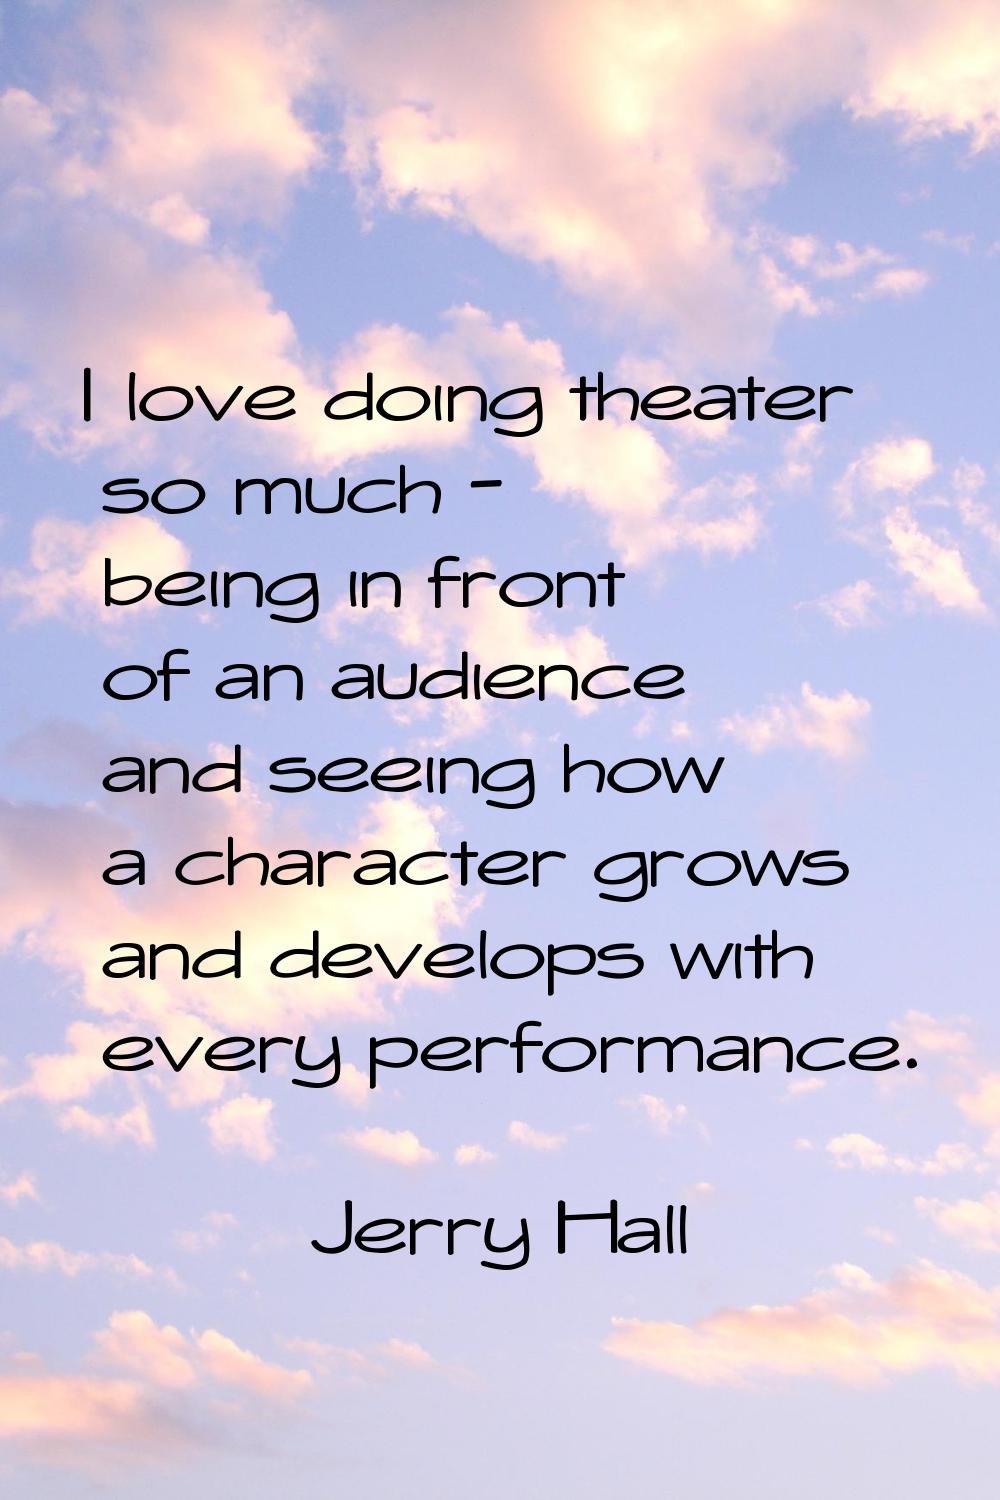 I love doing theater so much - being in front of an audience and seeing how a character grows and d